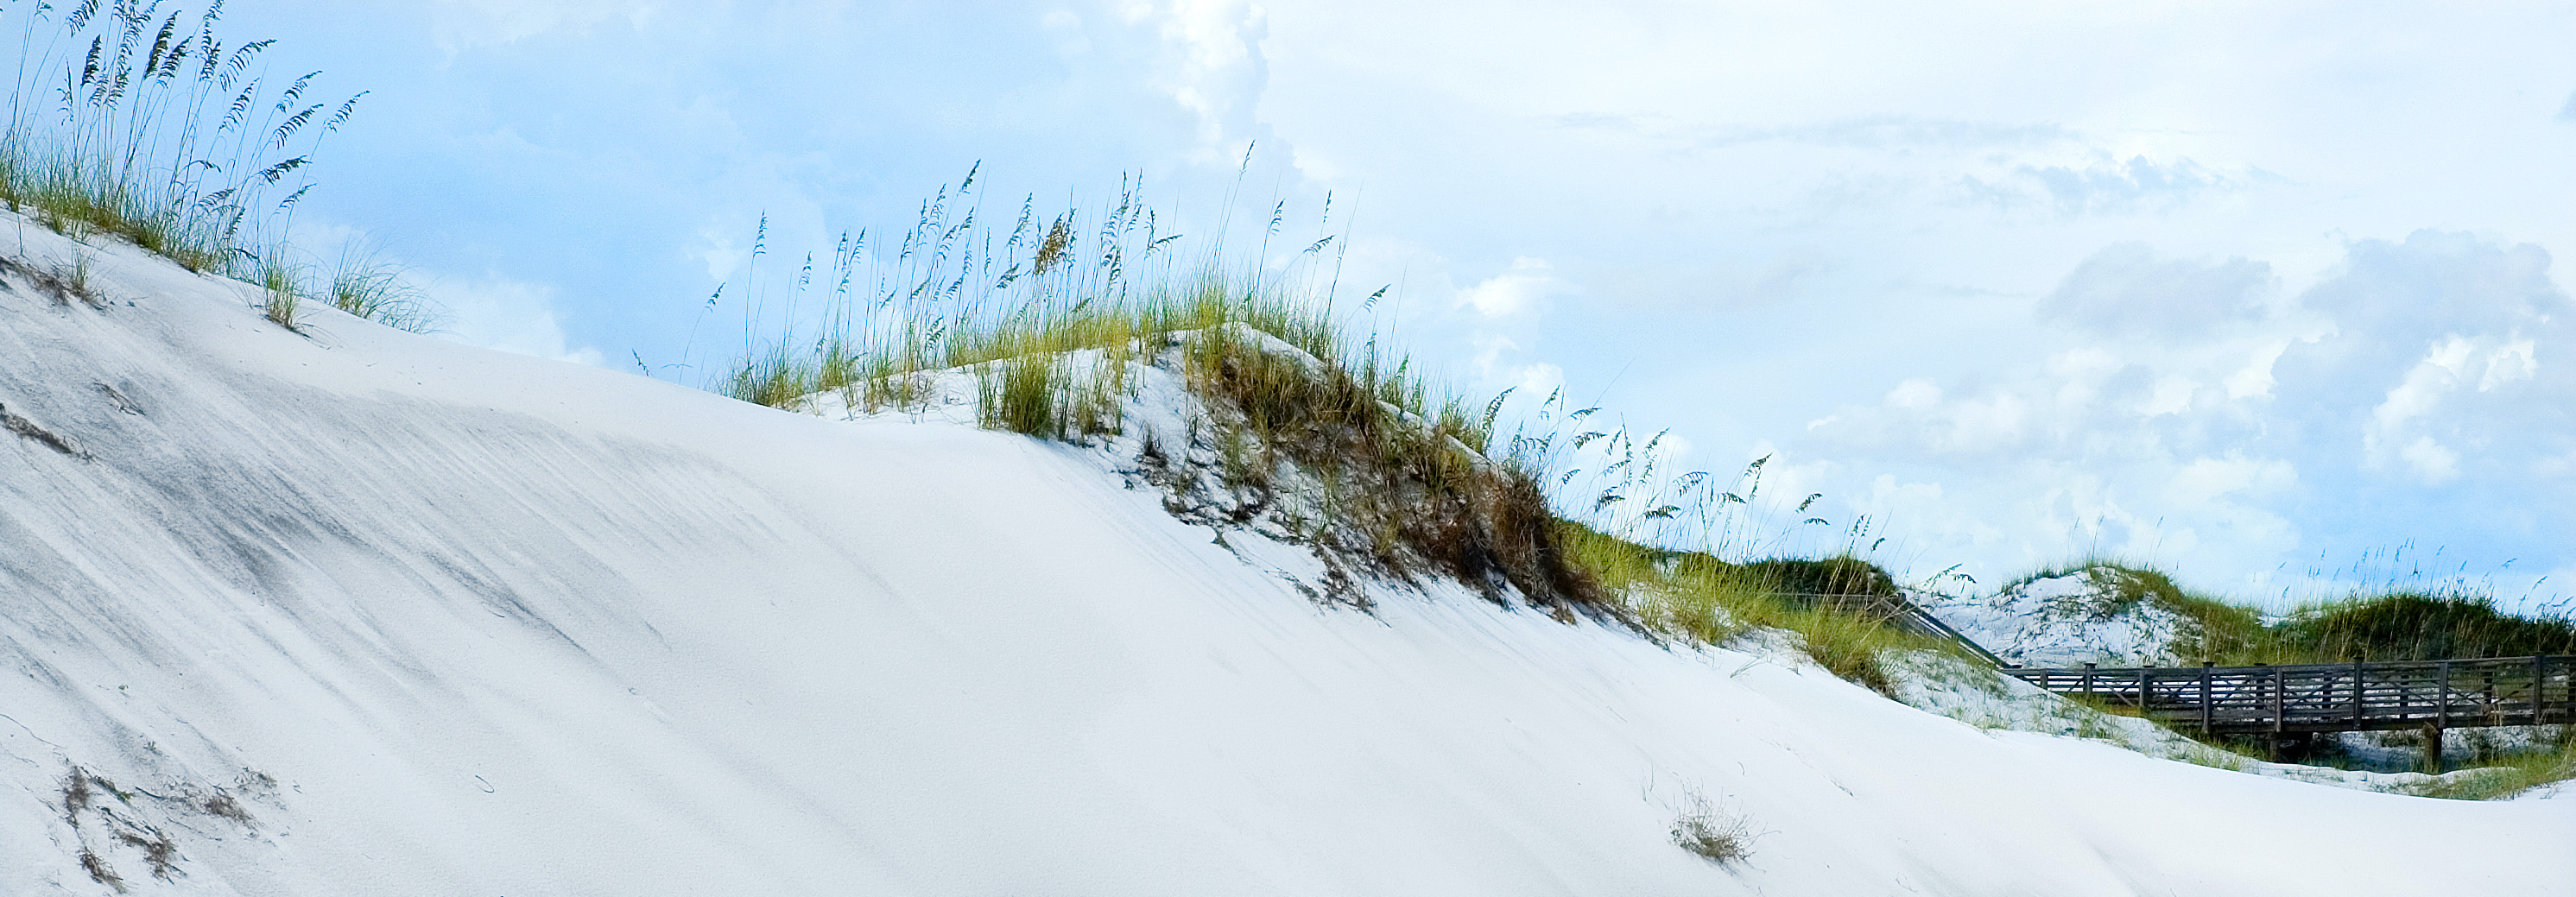 A tall sand dune toped with sea oats and grass on the beach at Watersound West Beach